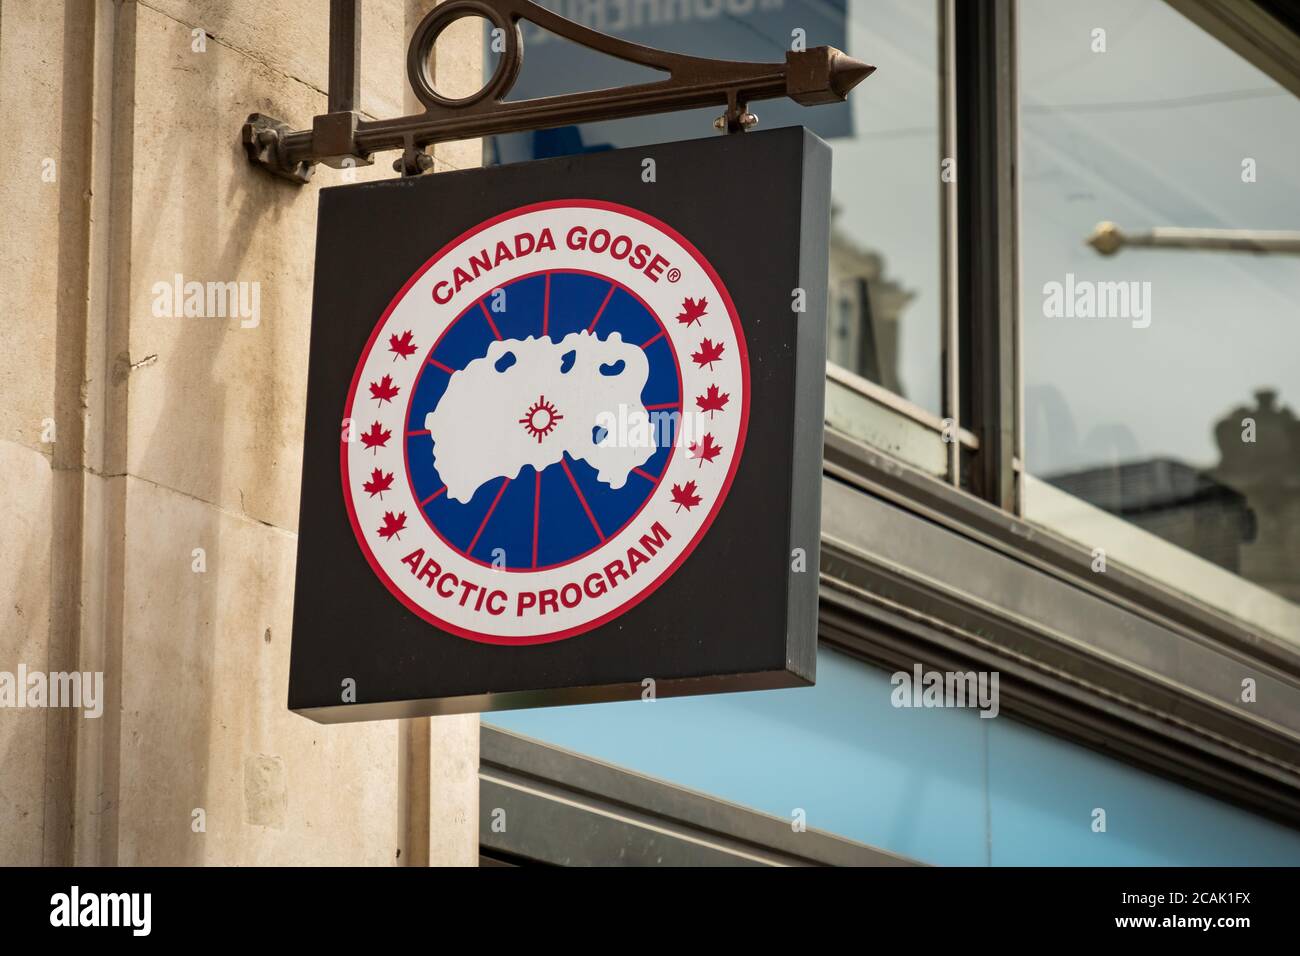 London- Canada Goose retail store signage in London's West End Stock Photo  - Alamy